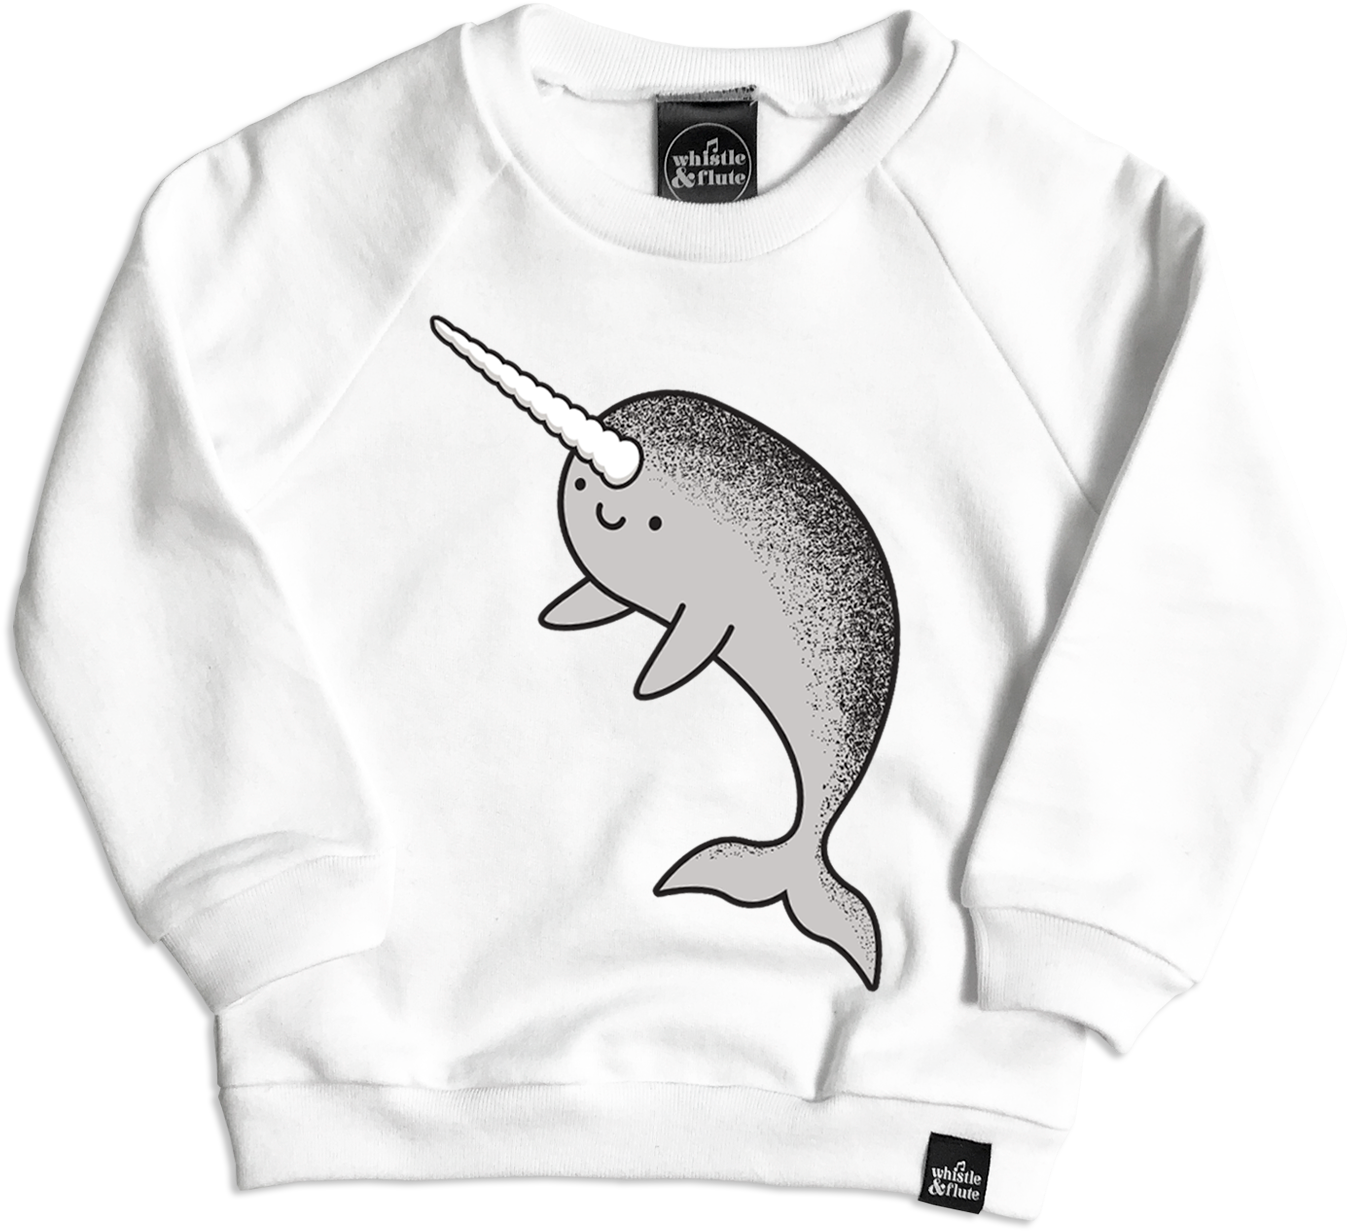 A White Sweatshirt With A Narwhal On It